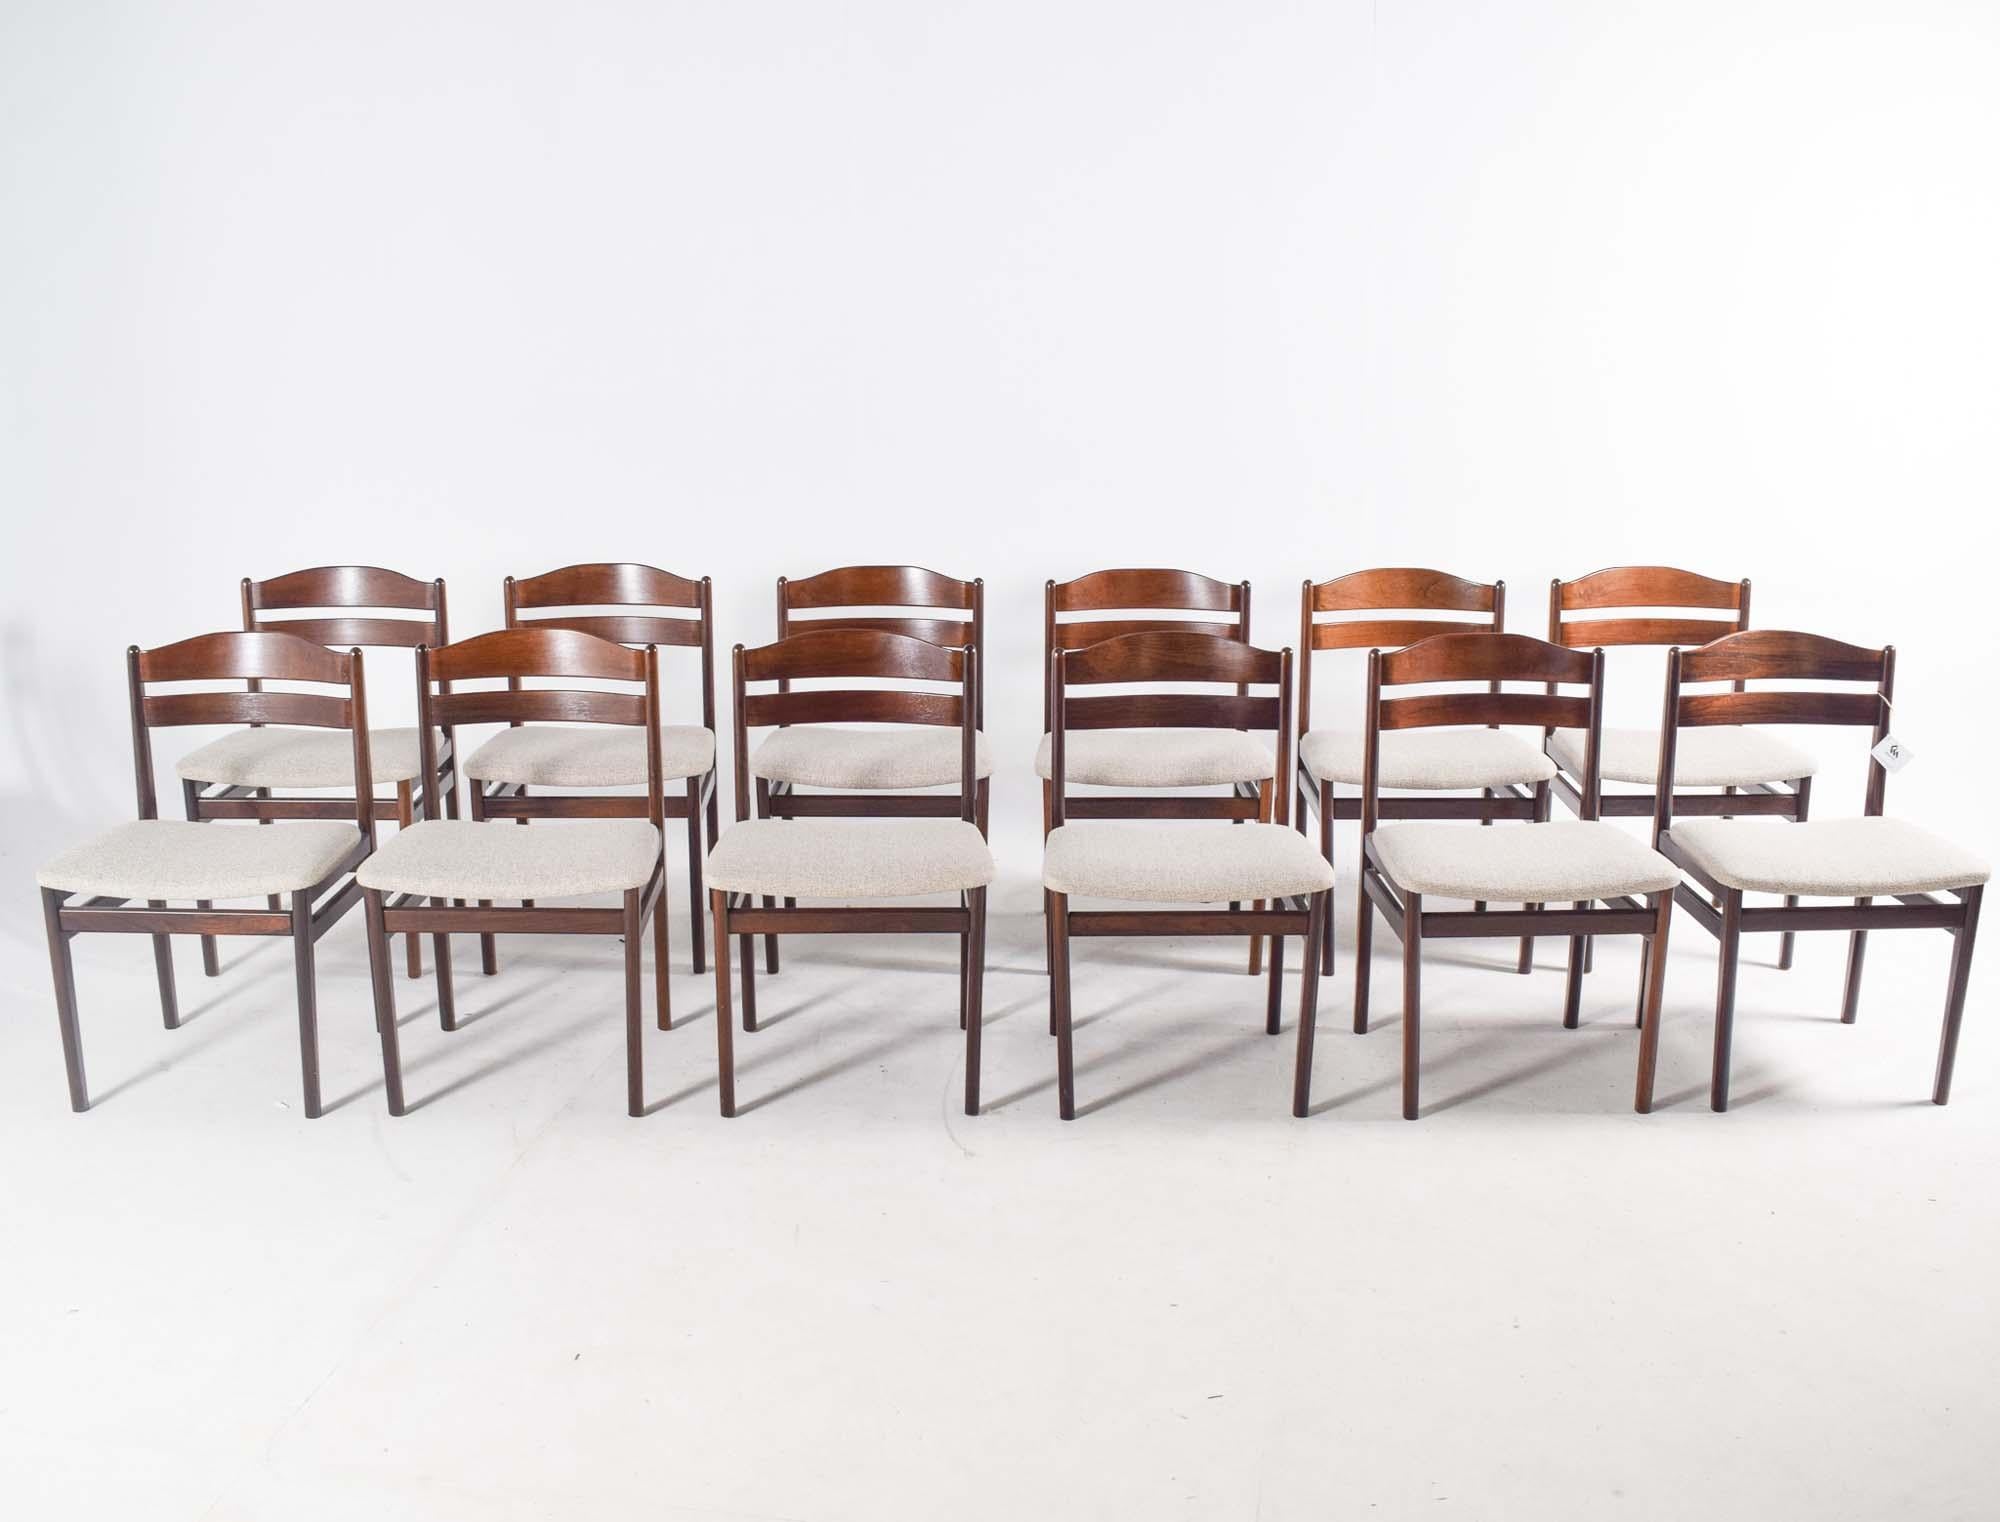 Danish Mid Century Modern Set of 12 Rosewood Dining Chairs, 1960s For Sale